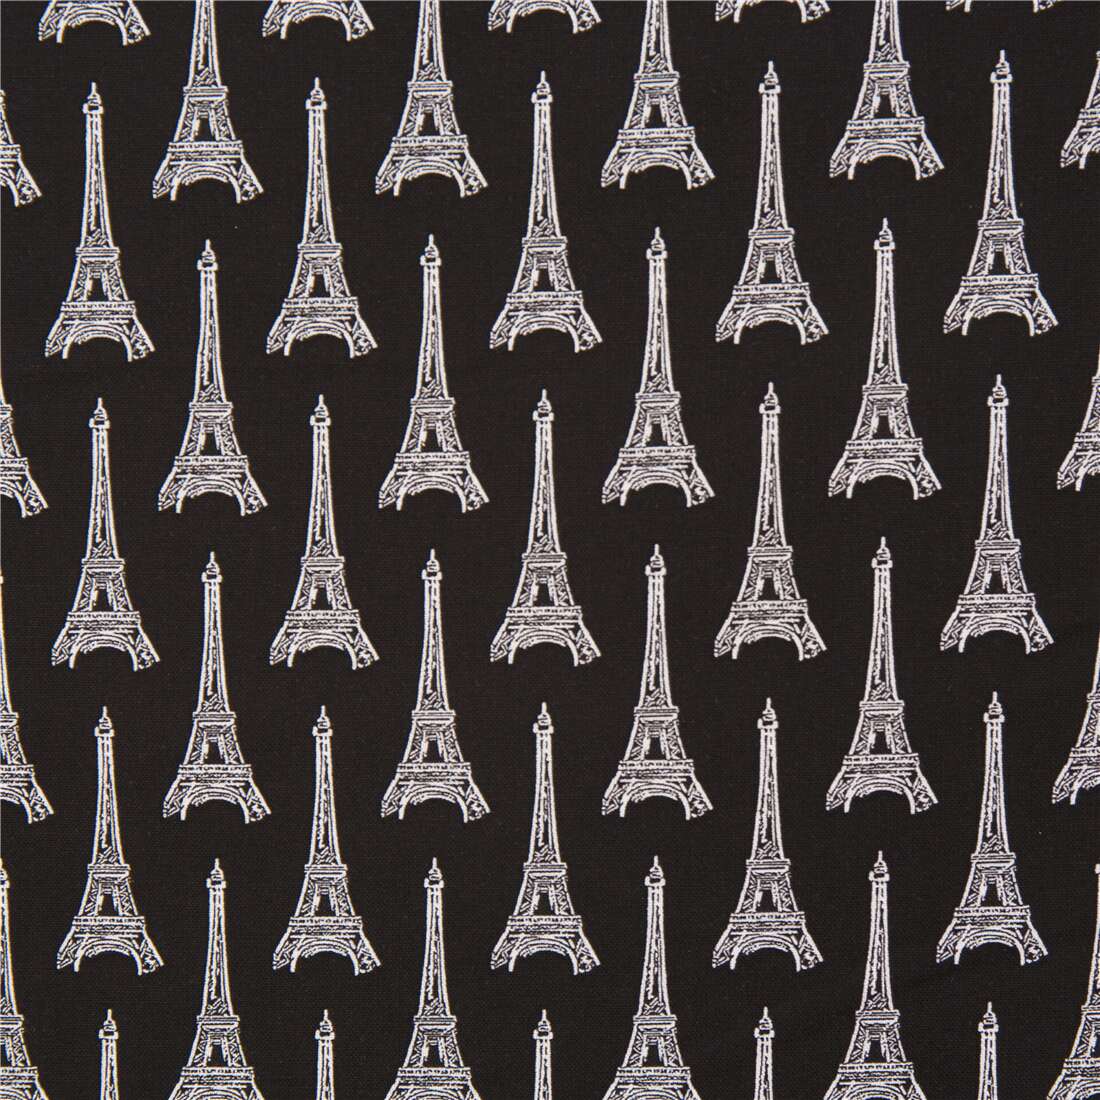 Bonjour Eiffel Tower Repeat Black From Timeless Treasures 